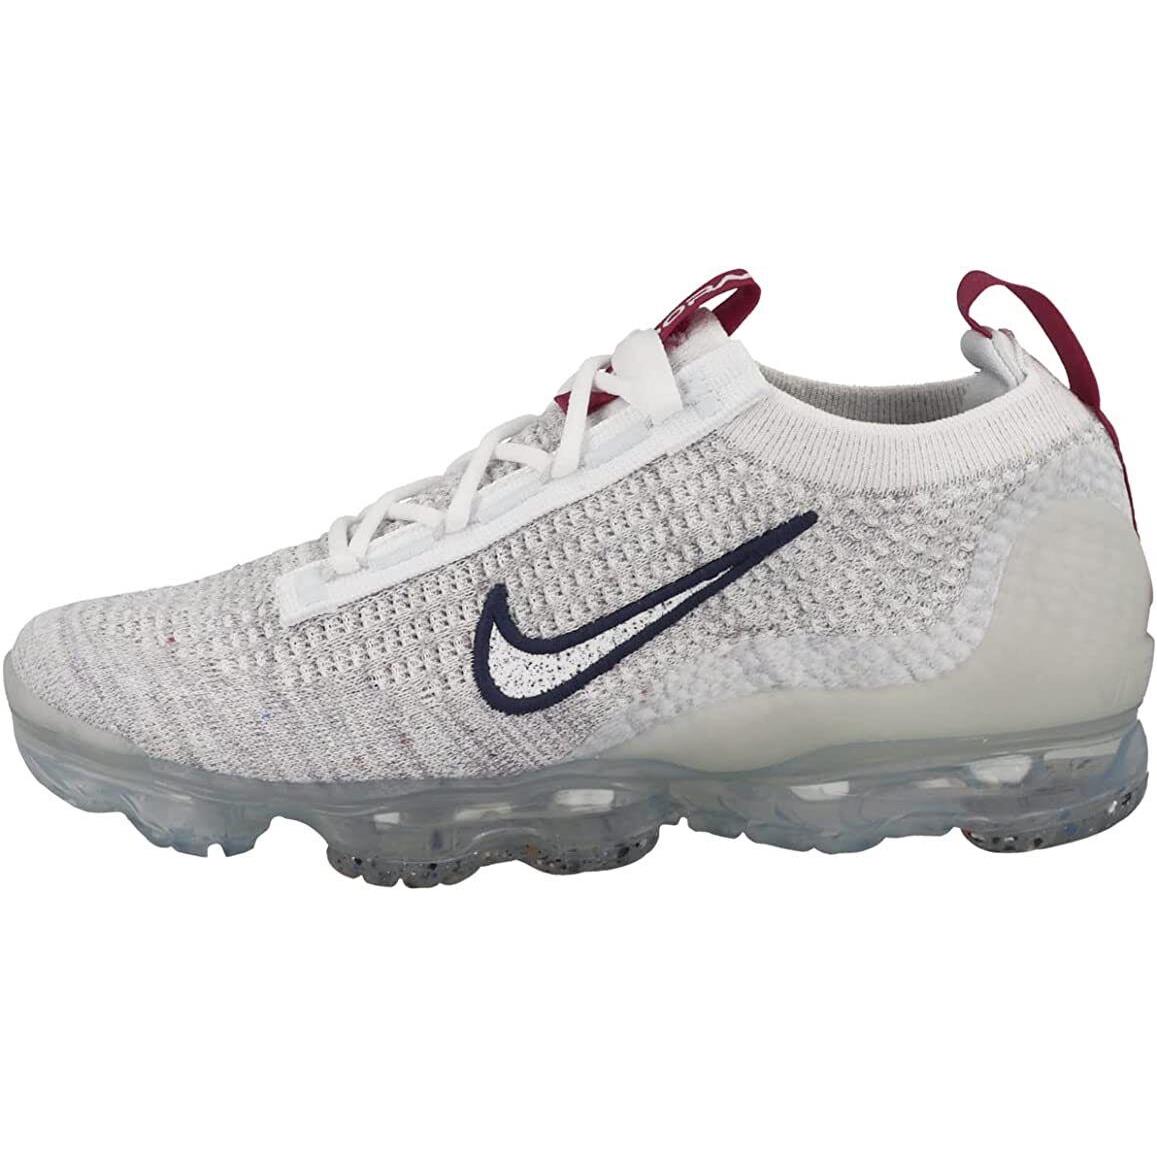 Nike Womens Air Vapormax 2021 Fk Running Trainers Dh4090 Sneakers Shoes - Photon Dust White 002